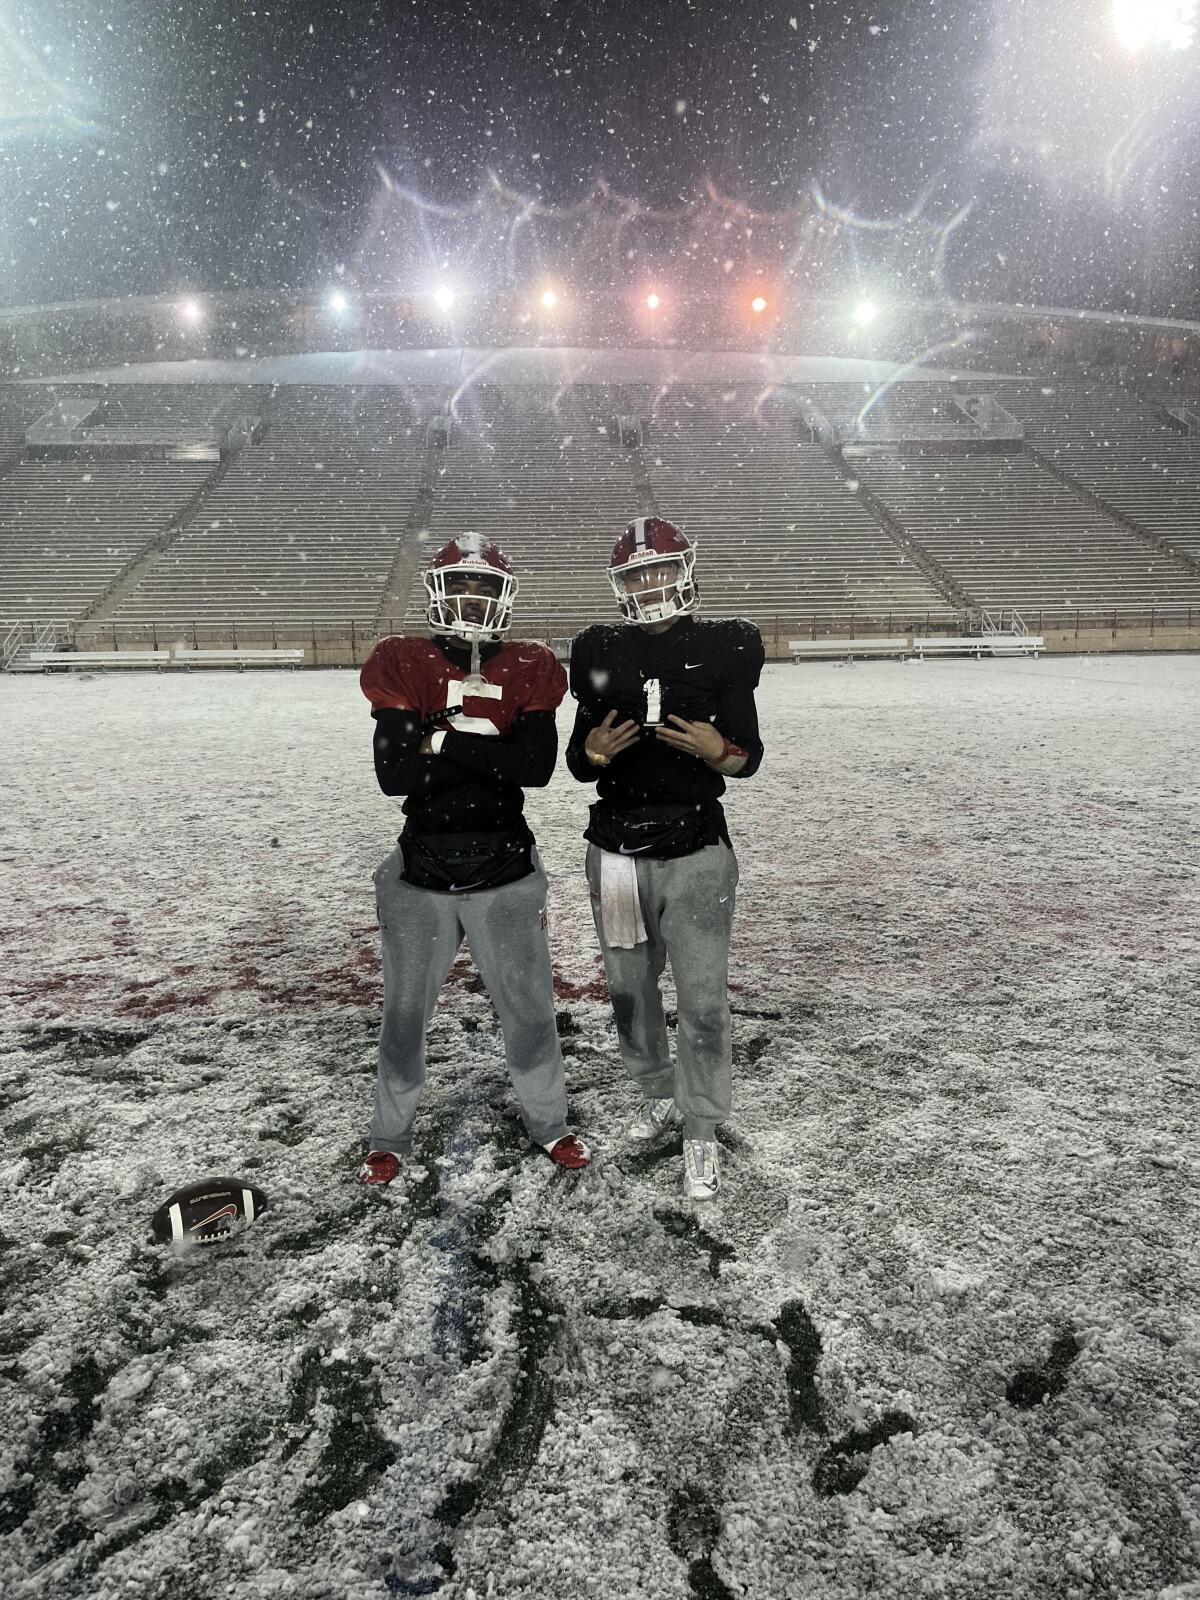 Two football players stand on a football field covered in snow at night.